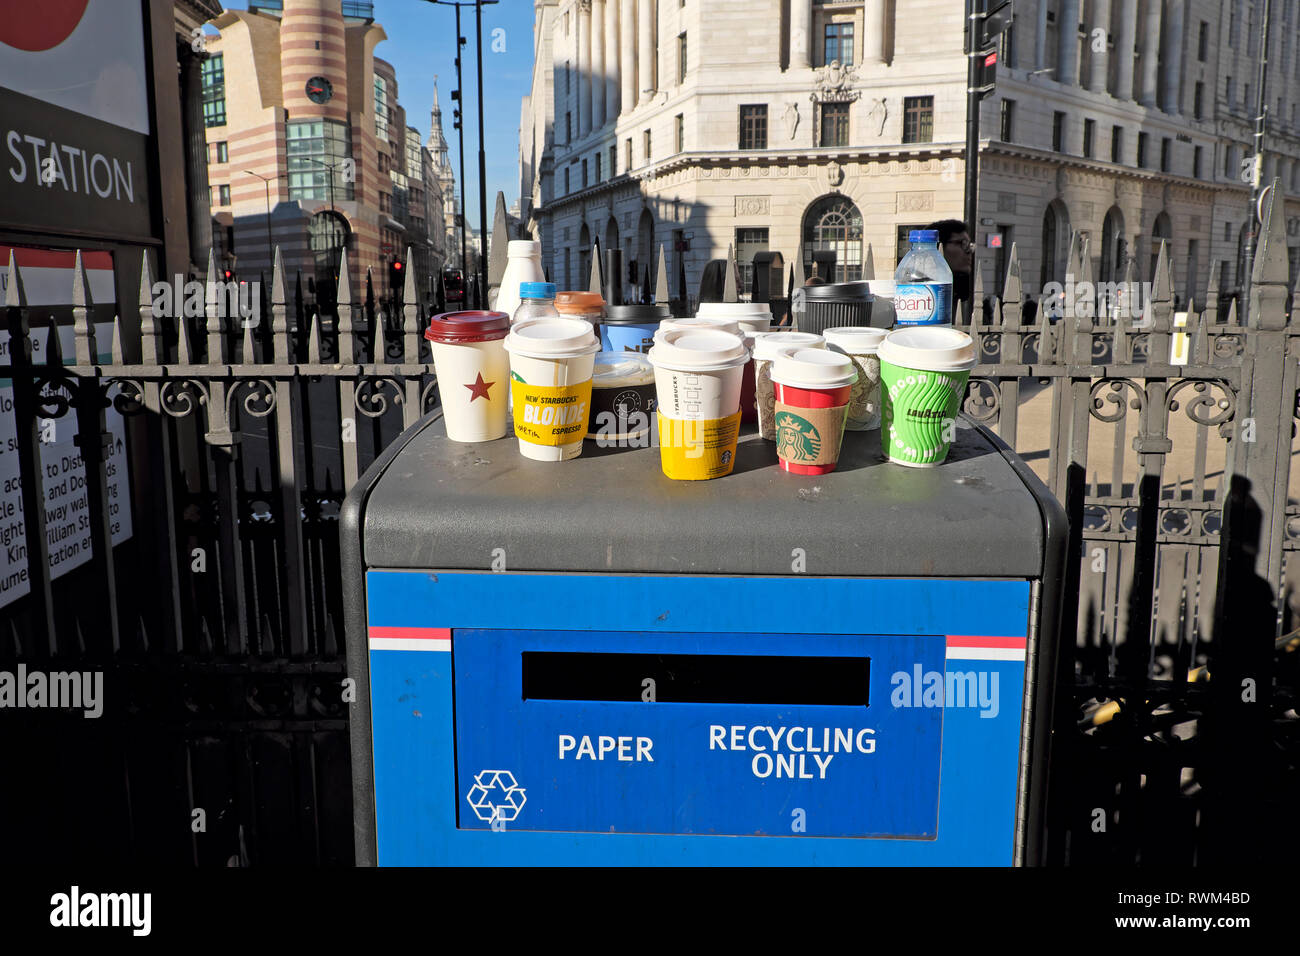 Paper and plastic empty cups and plastic bottles standing on a Paper Recycling Only waste bin Bank tube station in the City of London UK  KATHY DEWITT Stock Photo